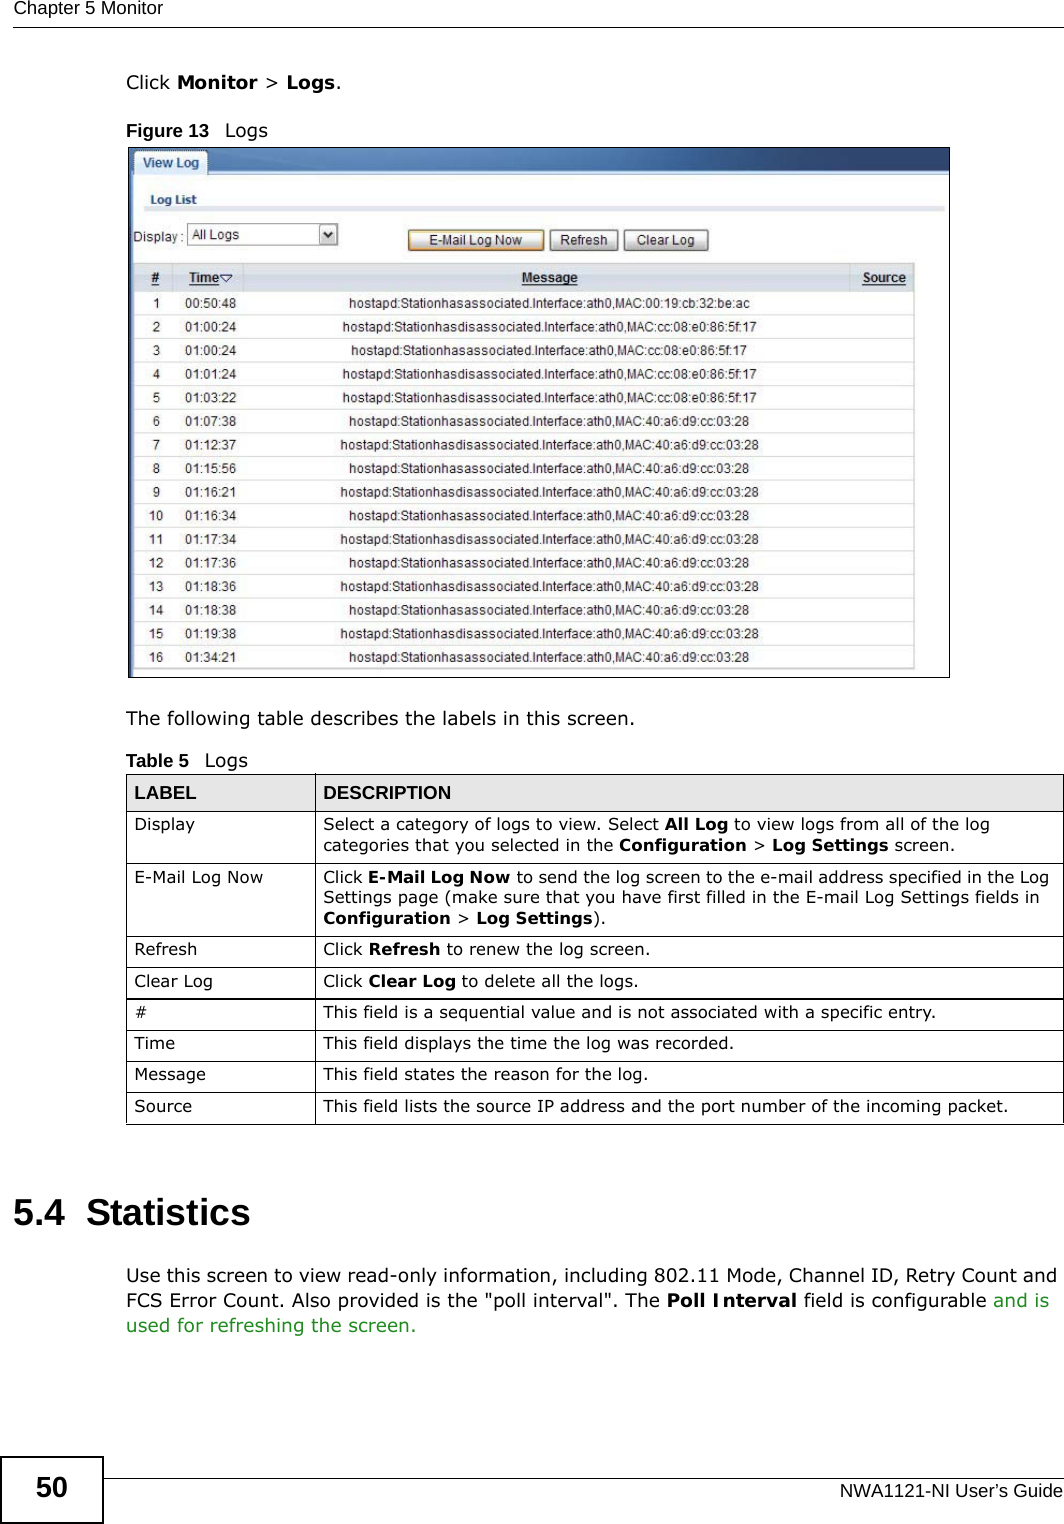 Chapter 5 MonitorNWA1121-NI User’s Guide50Click Monitor &gt; Logs.Figure 13   Logs The following table describes the labels in this screen. 5.4  StatisticsUse this screen to view read-only information, including 802.11 Mode, Channel ID, Retry Count and FCS Error Count. Also provided is the &quot;poll interval&quot;. The Poll Interval field is configurable and is used for refreshing the screen.Table 5   LogsLABEL DESCRIPTIONDisplay  Select a category of logs to view. Select All Log to view logs from all of the log categories that you selected in the Configuration &gt; Log Settings screen.E-Mail Log Now Click E-Mail Log Now to send the log screen to the e-mail address specified in the Log Settings page (make sure that you have first filled in the E-mail Log Settings fields in Configuration &gt; Log Settings).Refresh Click Refresh to renew the log screen. Clear Log Click Clear Log to delete all the logs. #This field is a sequential value and is not associated with a specific entry.Time  This field displays the time the log was recorded. Message This field states the reason for the log.Source This field lists the source IP address and the port number of the incoming packet.